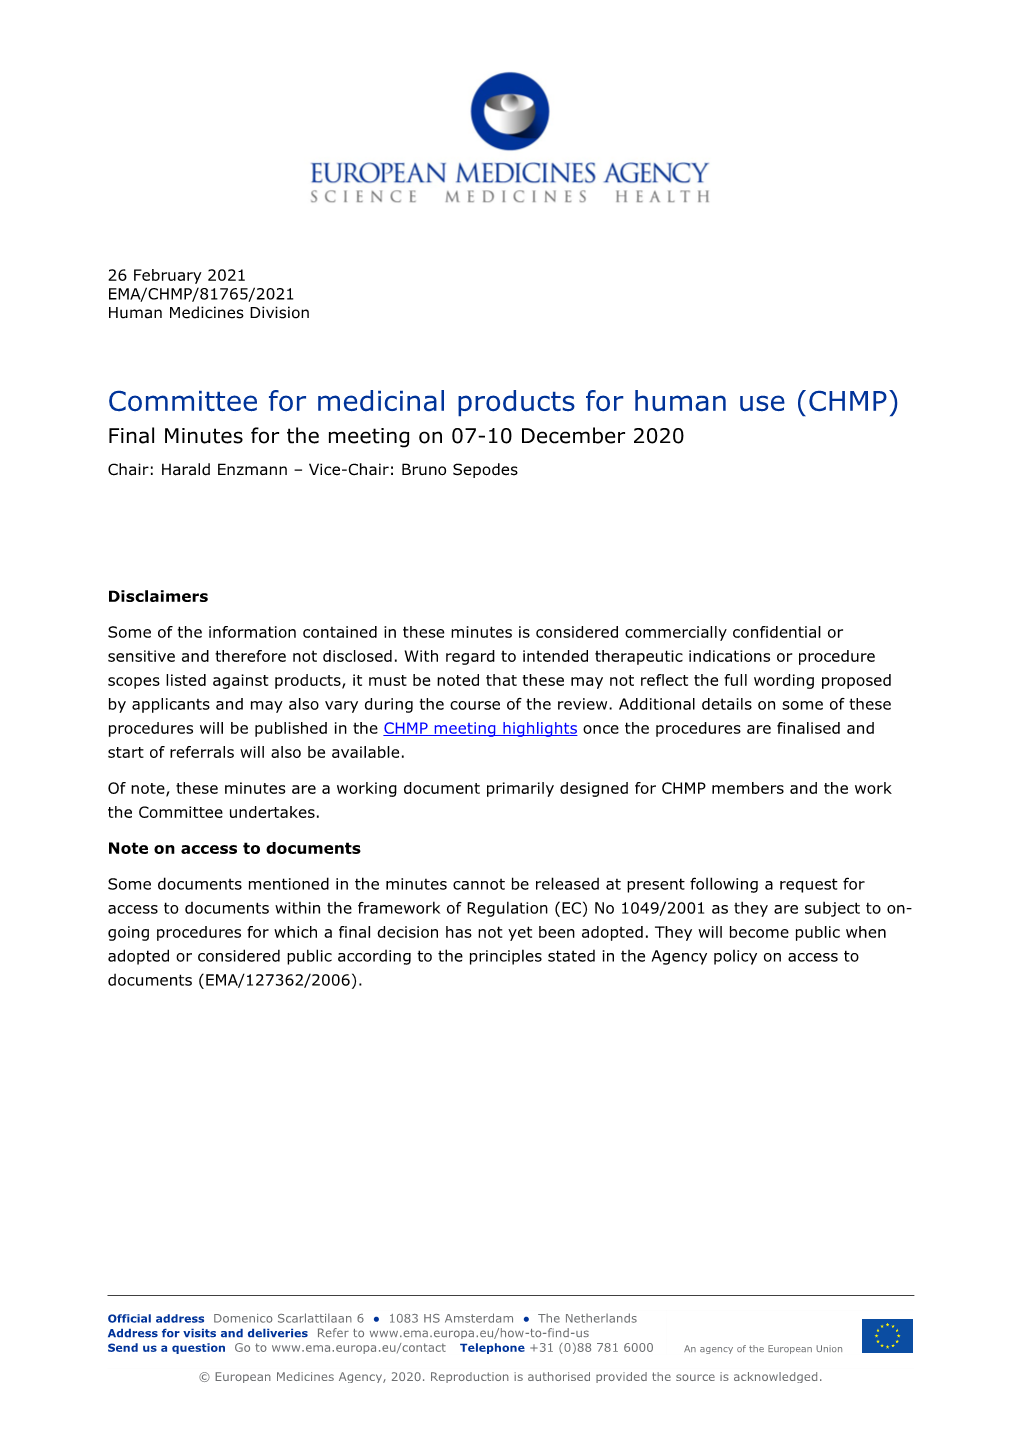 (CHMP) Final Minutes for the Meeting on 07-10 December 2020 Chair: Harald Enzmann – Vice-Chair: Bruno Sepodes